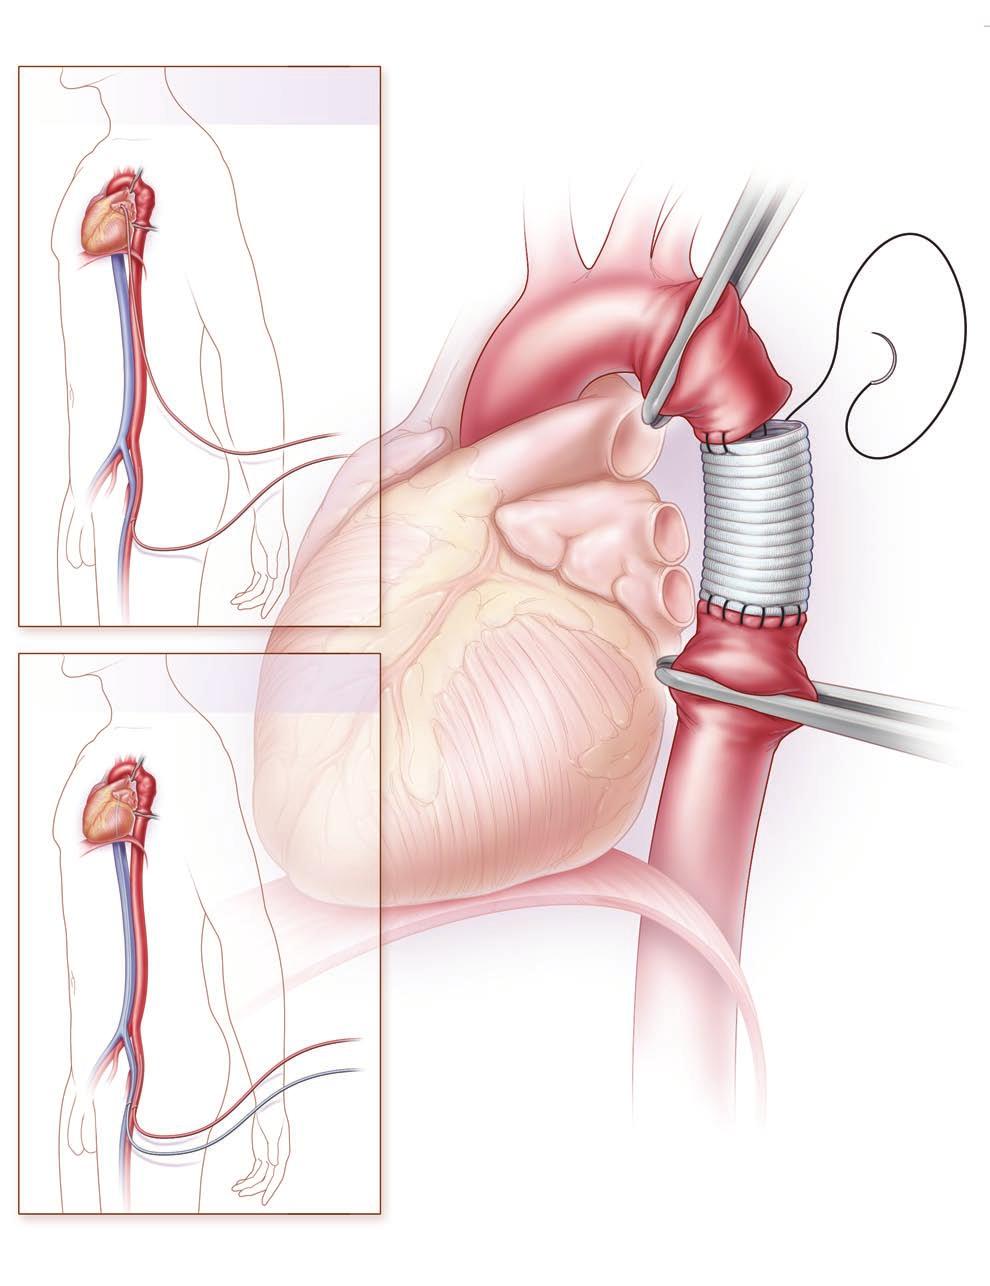 A Pulmonary vein to femoral-artery bypass Left atrium Aortic arch To pump From pump Open repair with interposition graft Femoral artery B Femoral venous femoral arterial cardiopulmonary bypass